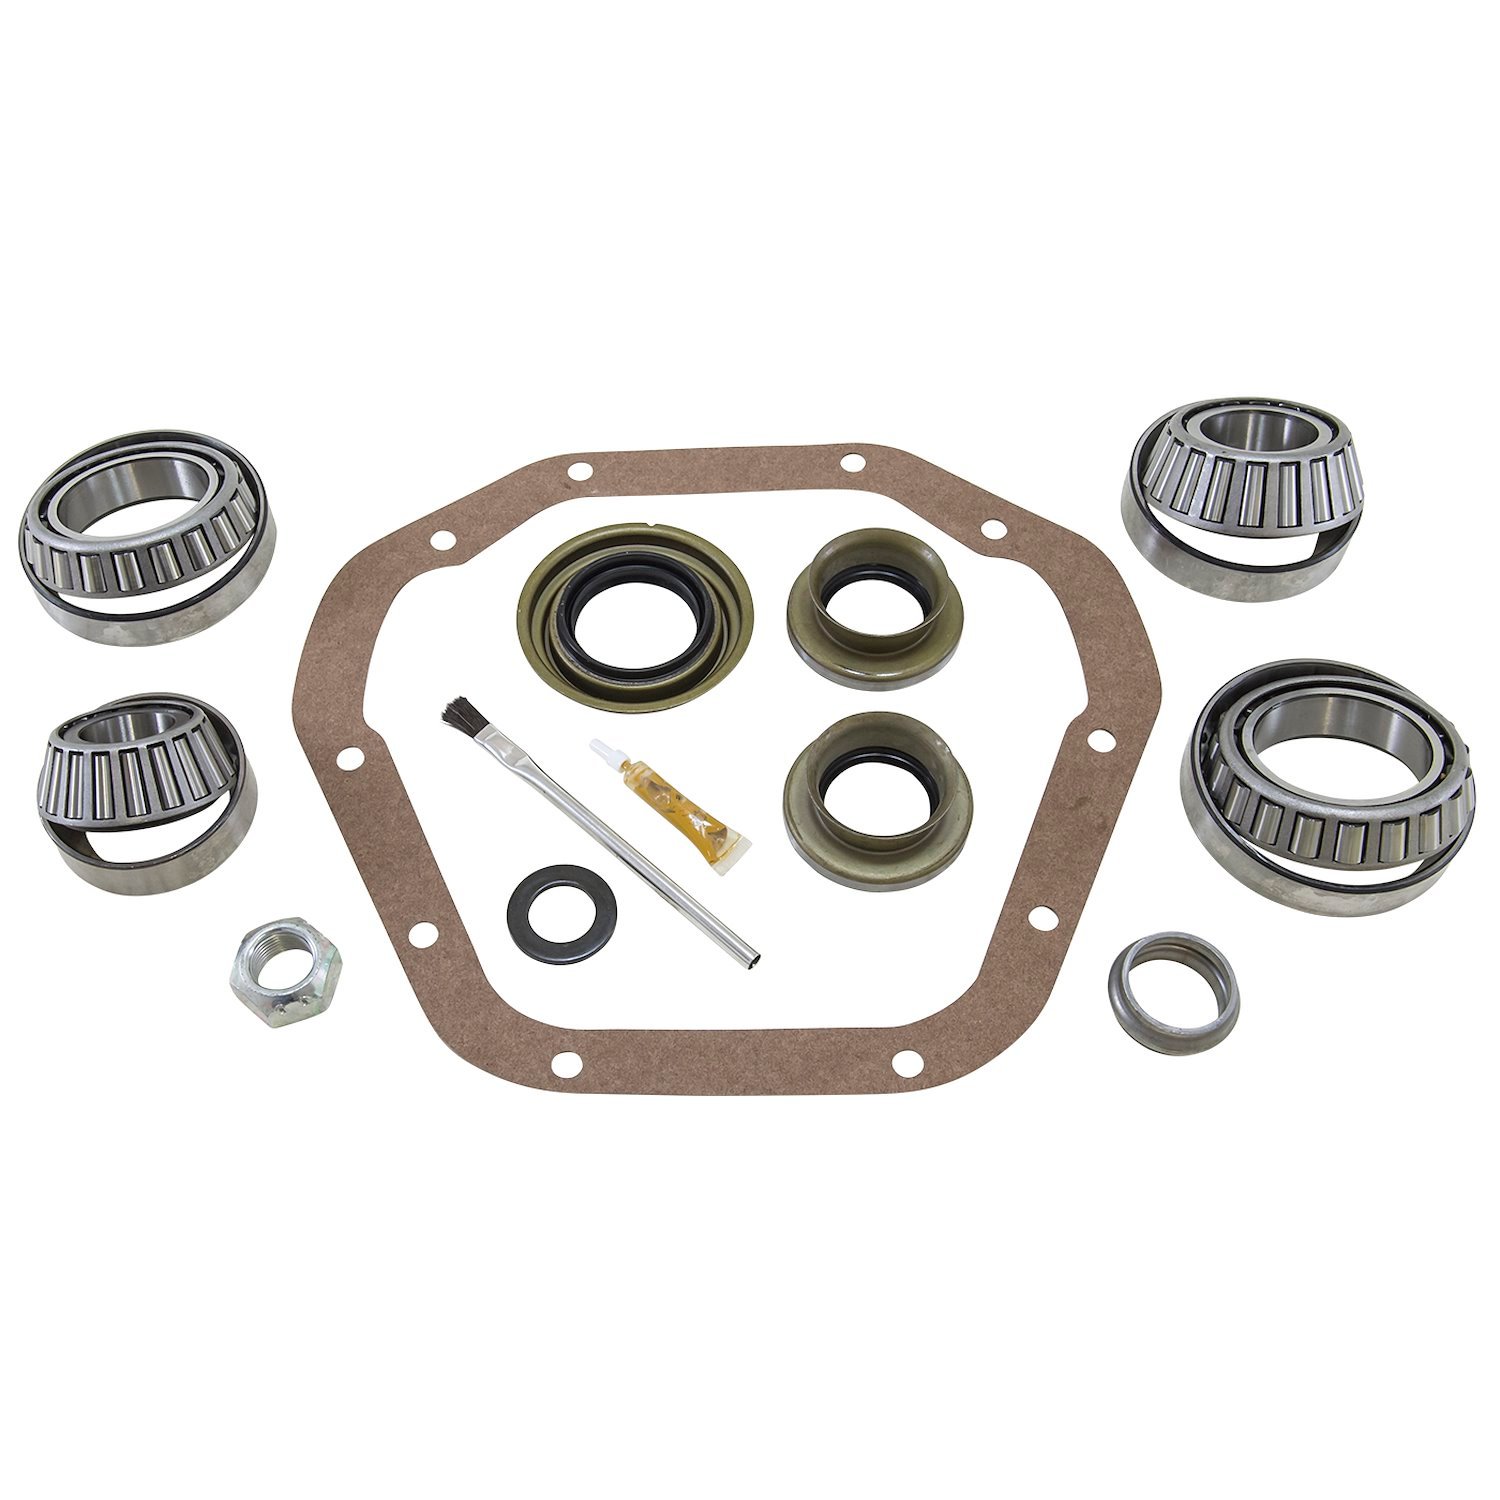 Bearing Install Kit For Dana 50 Differential (Straight Axle)